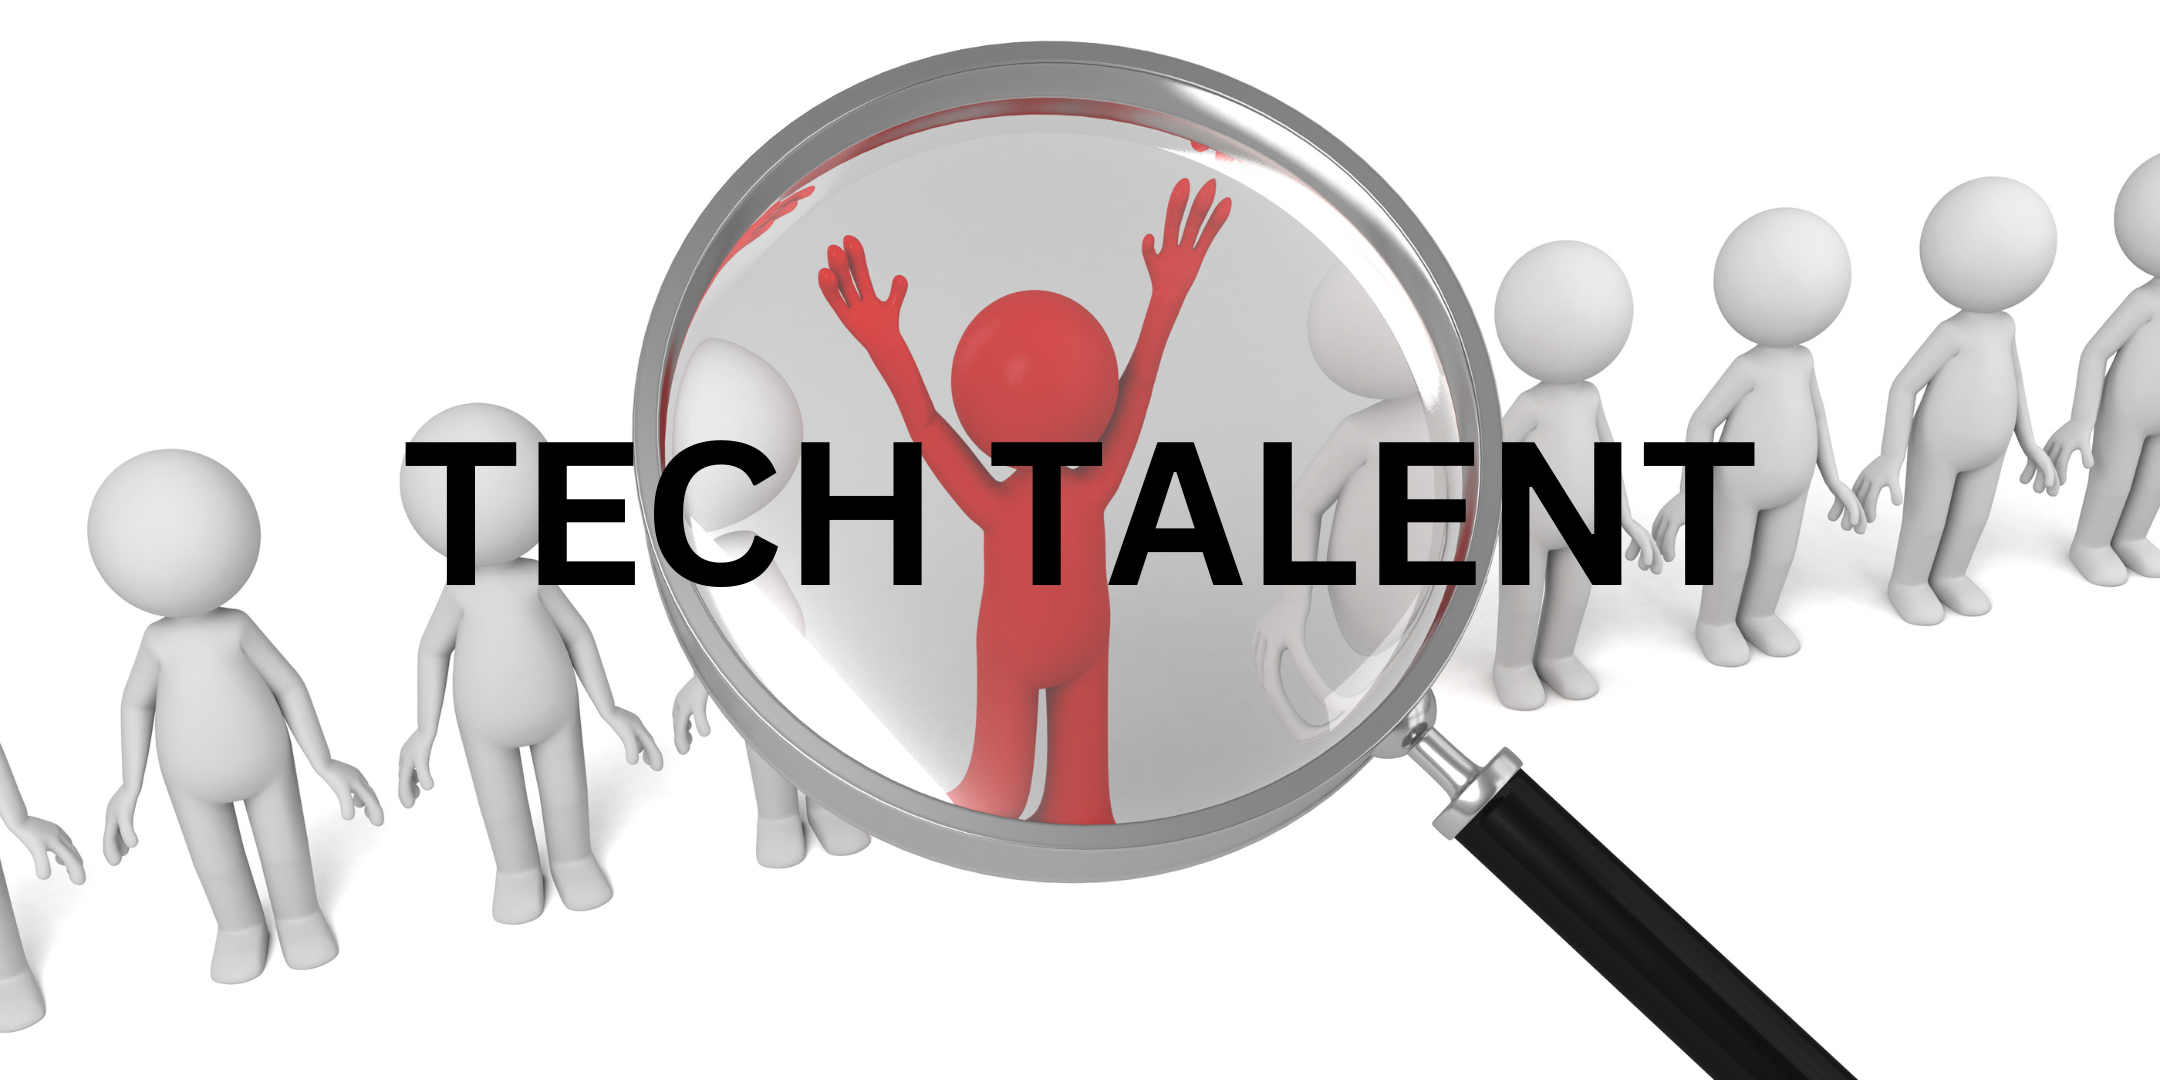 Get to know Tech talent